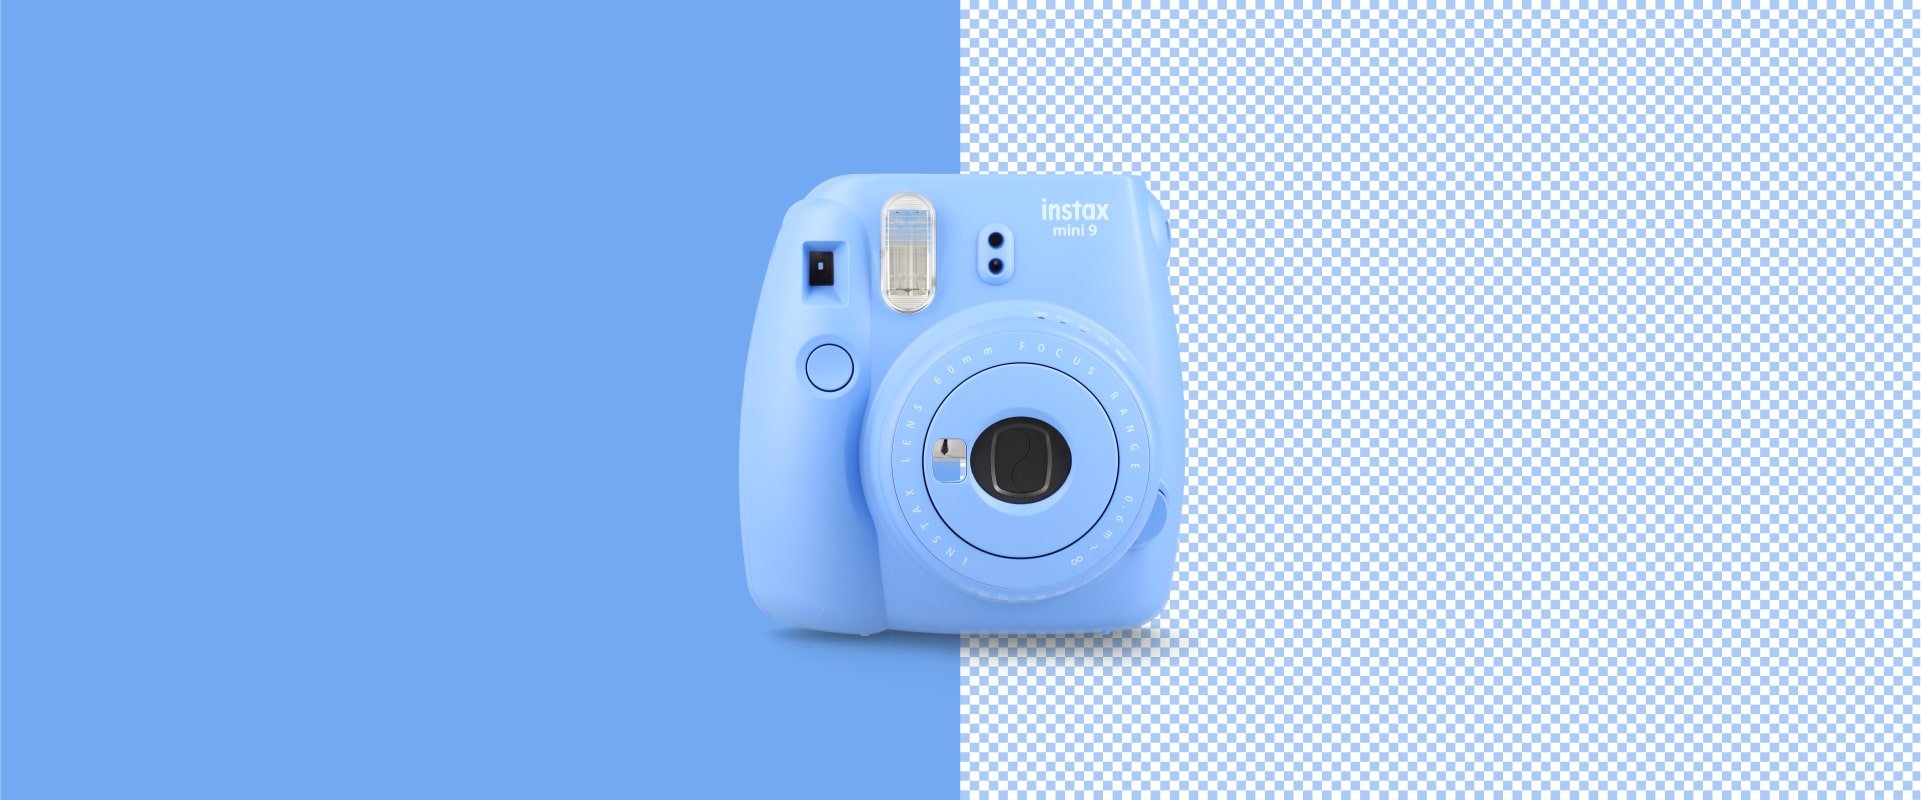 How to remove background from a product image